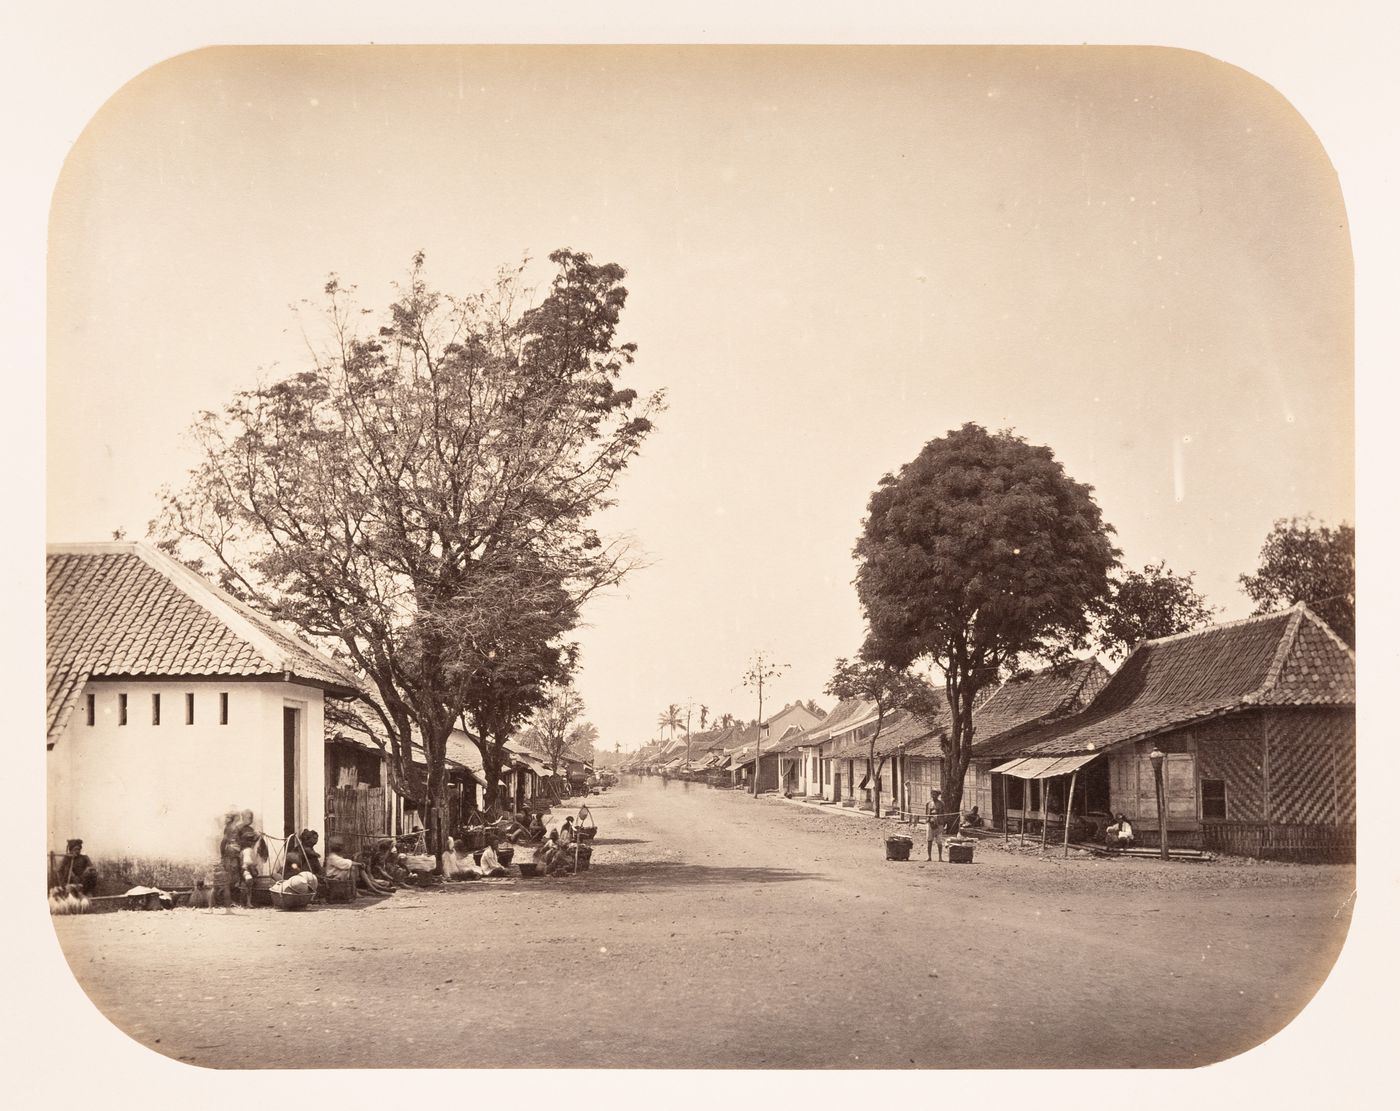 View of the Pasar Baru market showing stores, a street and people, Bandong (now Bandung), Dutch East Indies (now Indonesia)